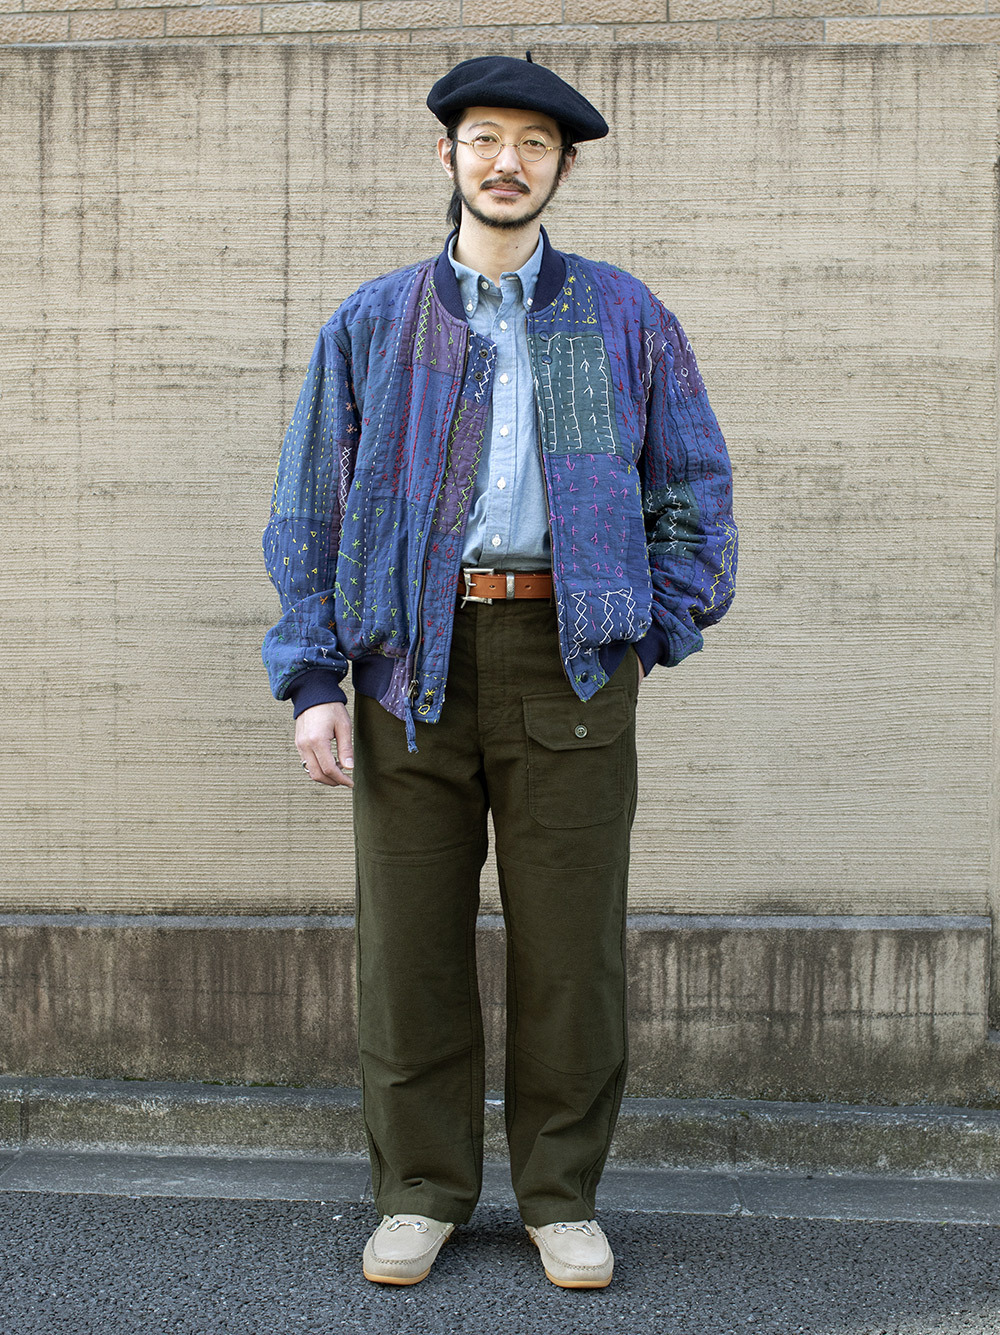 ENGINEERED GARMENTS〉exclusively for NEPENTHES | NEPENTHES ...